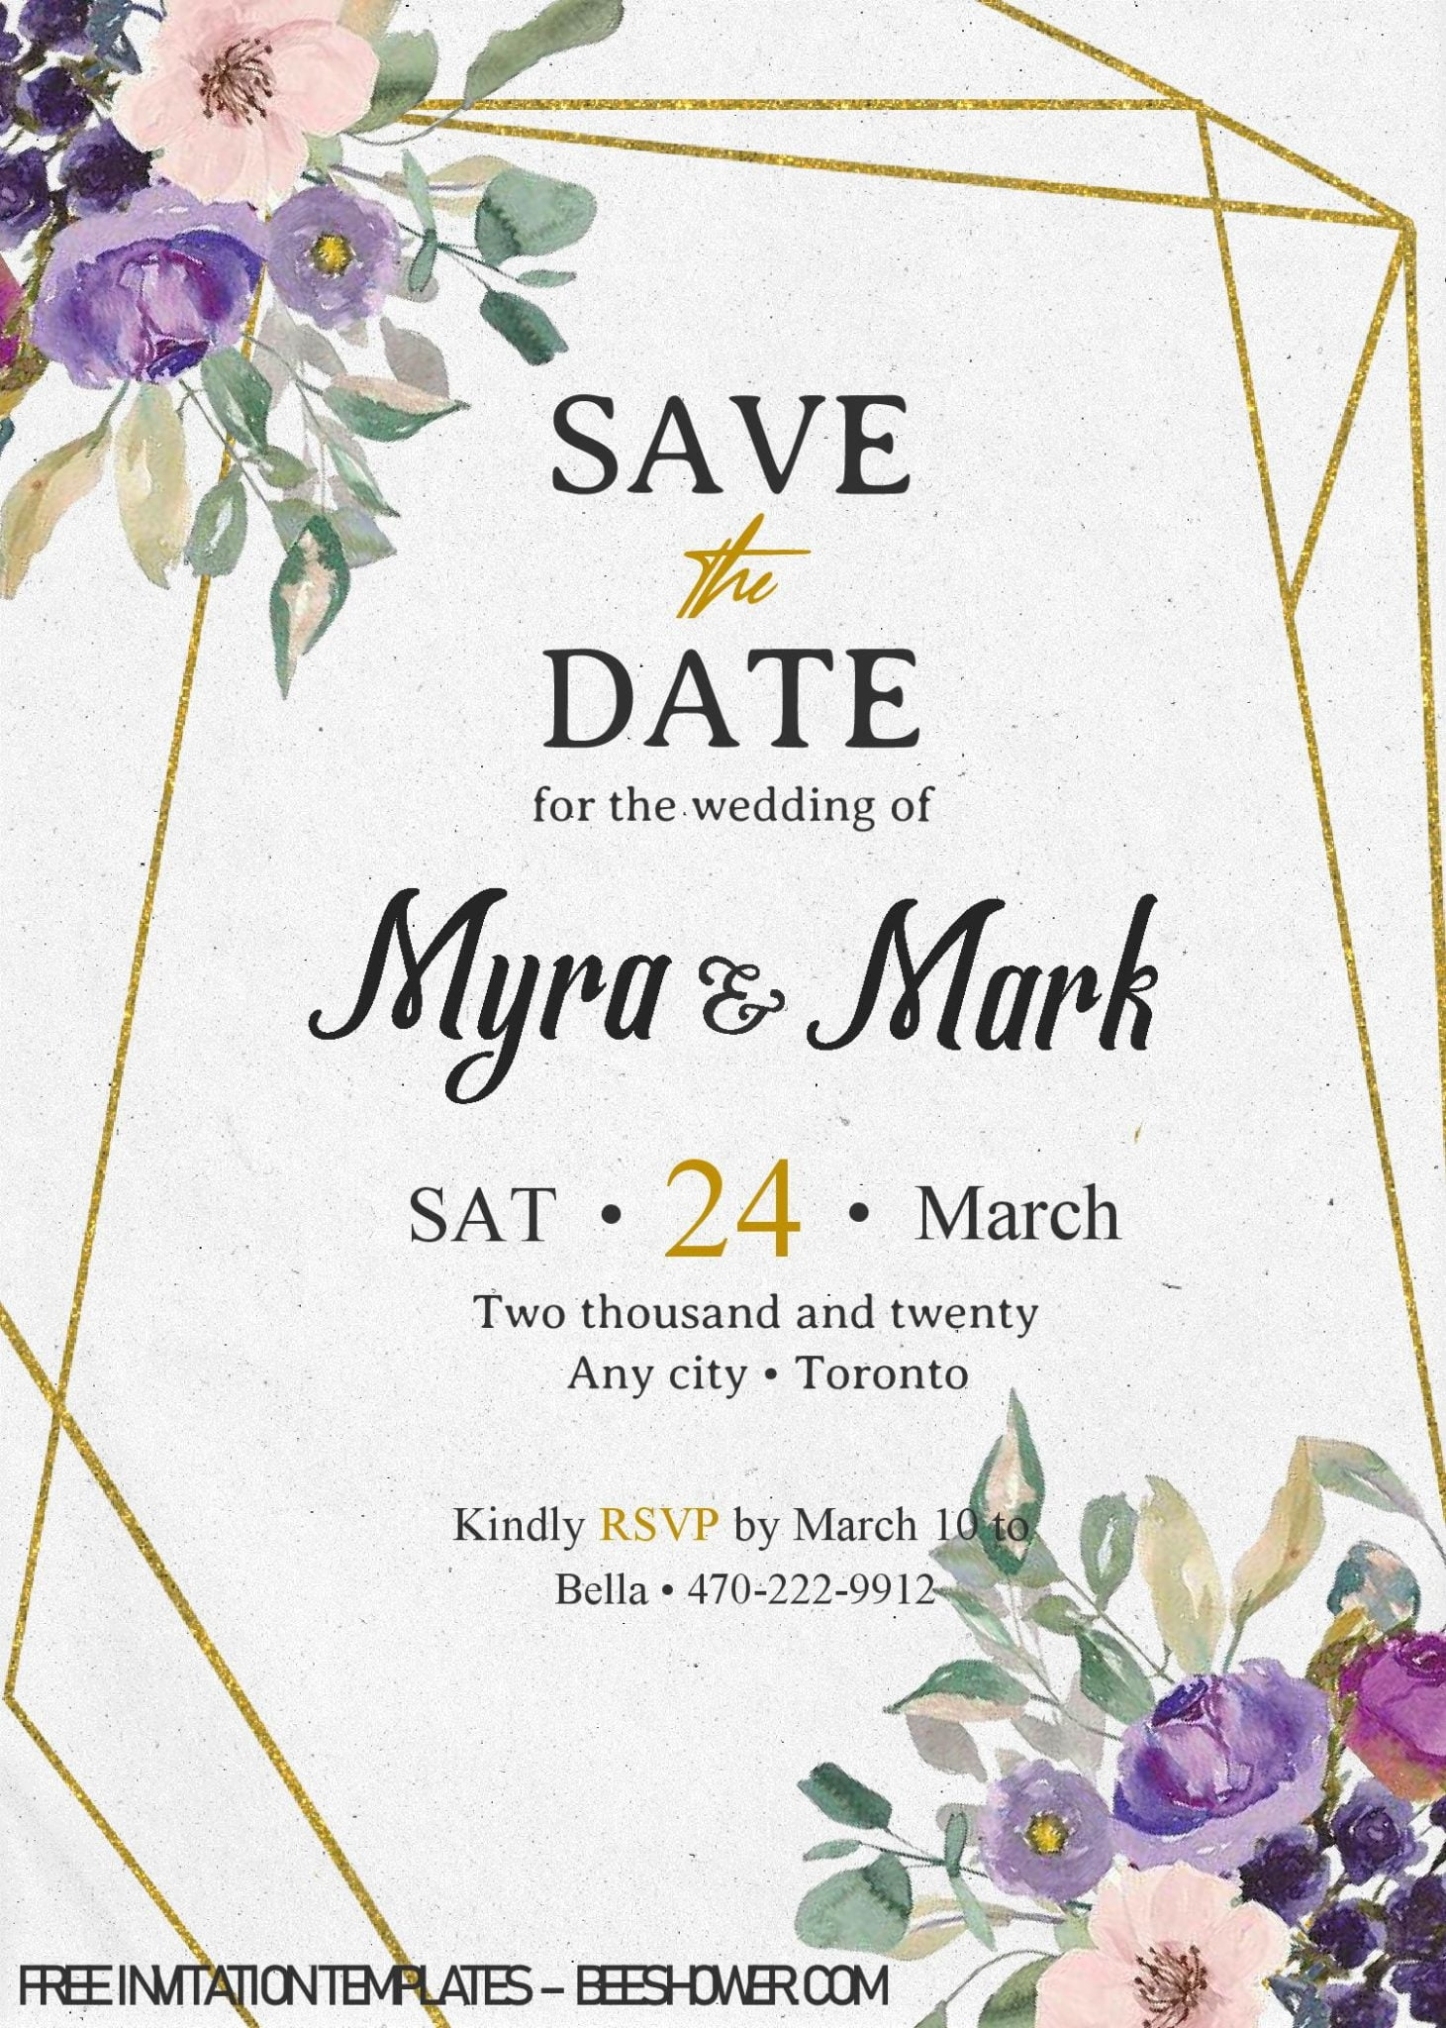 Save The Date Invitation Templates - Editable With Ms Word | Beeshower For Save The Date Templates Word